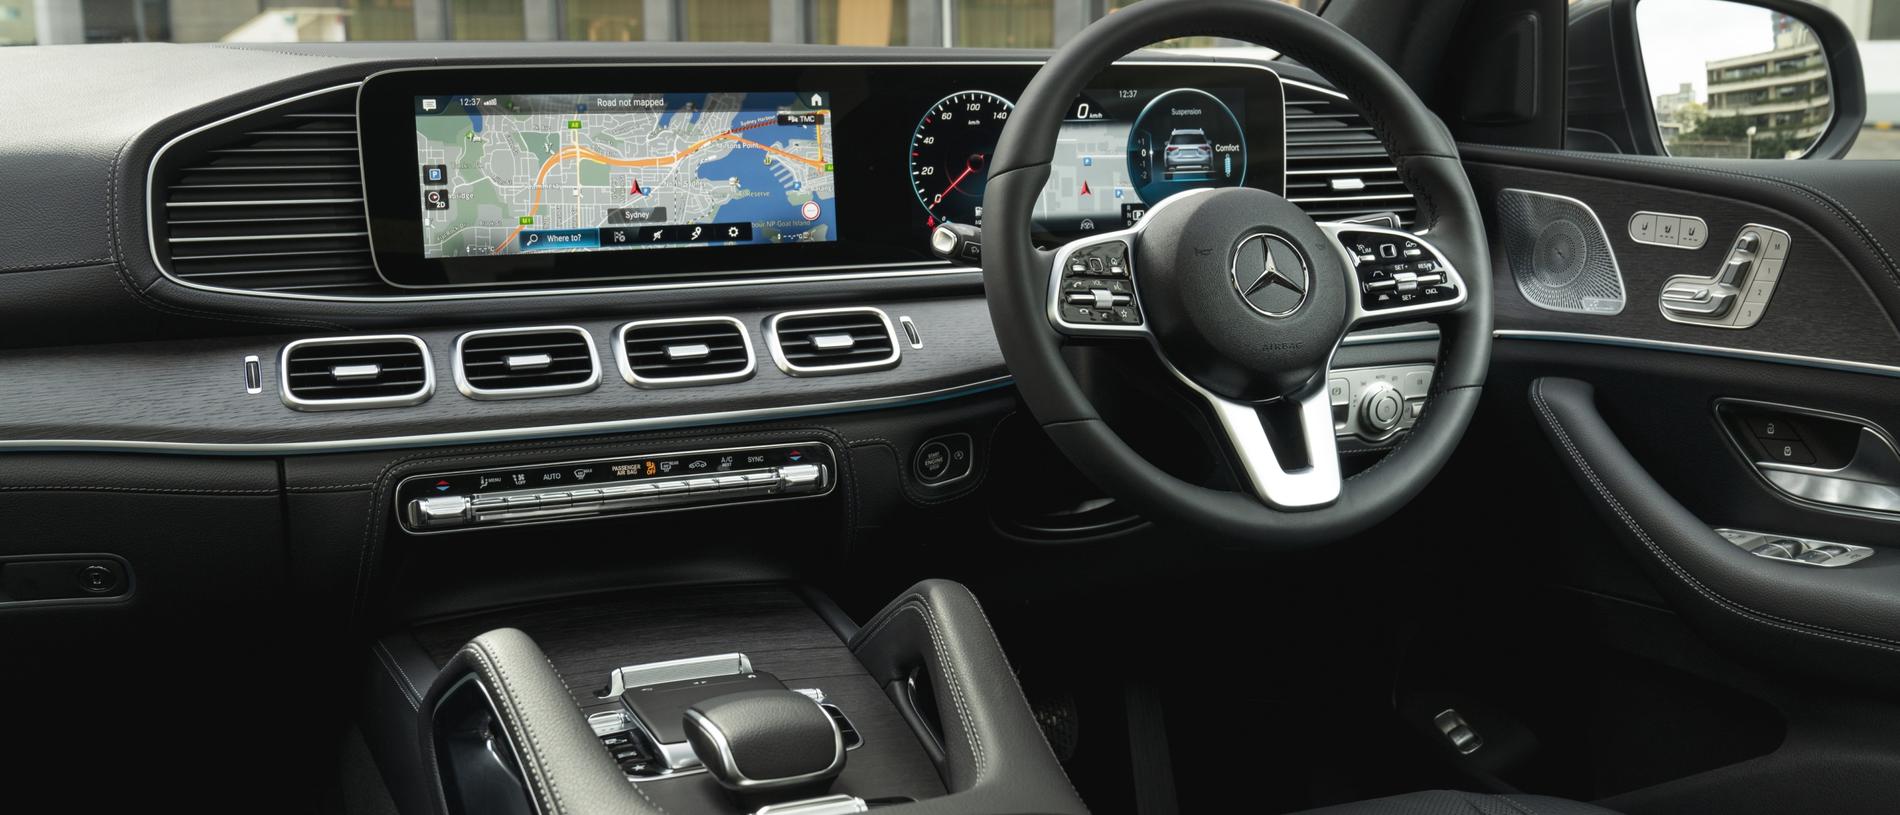 Dash of style: Infotainment set-up is easy to use on the move